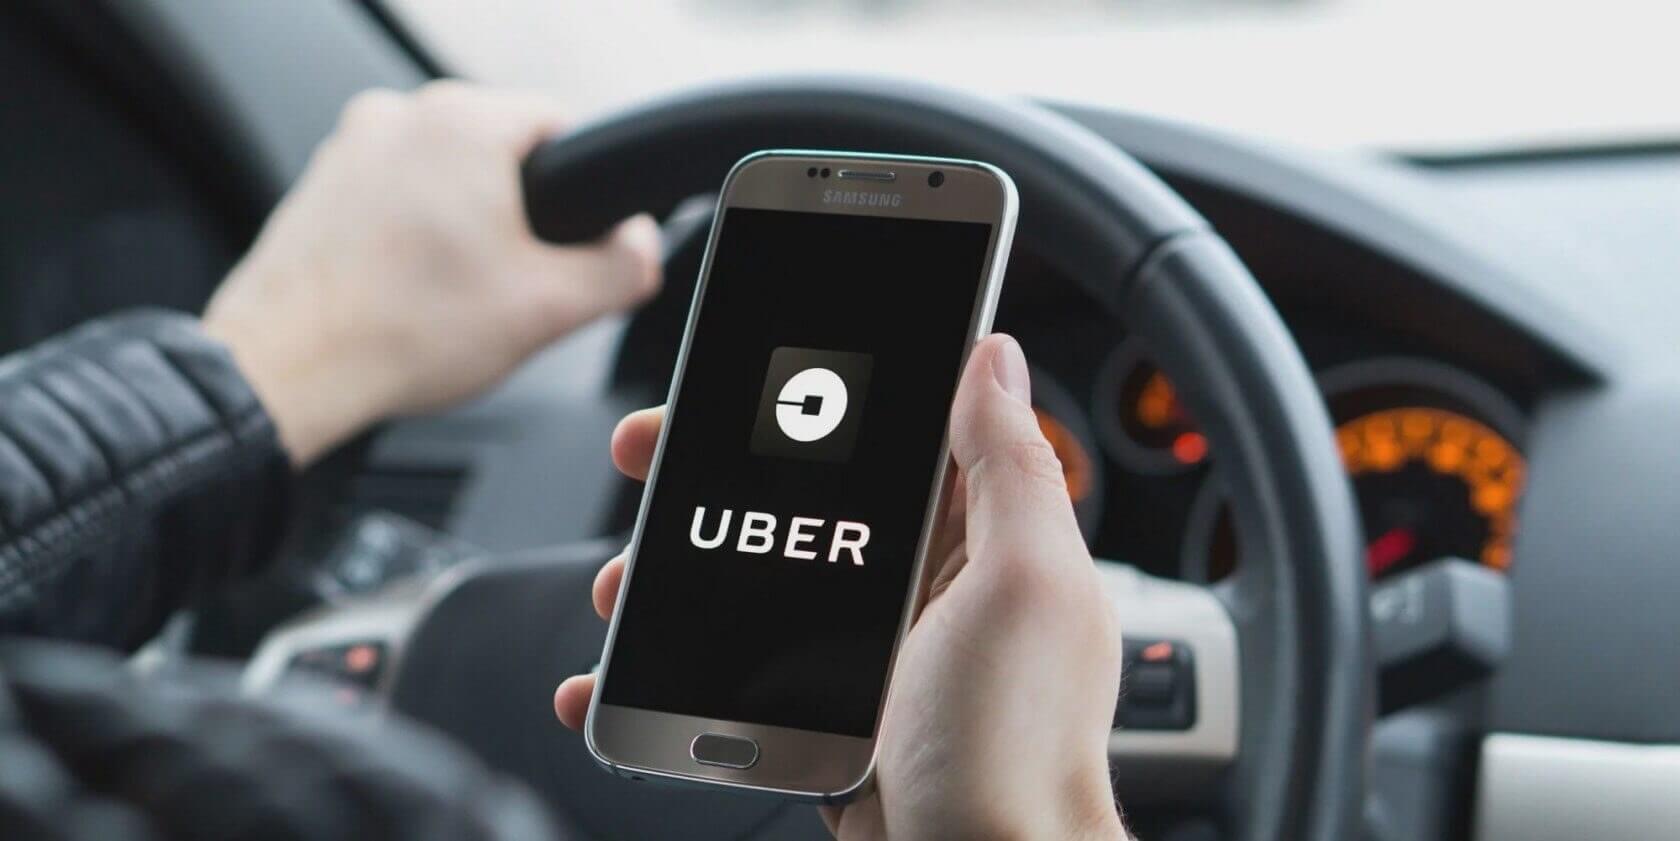 New Jersey says Uber is 'misclassifying' drivers as contractors, asks for $650 million in overdue employment taxes